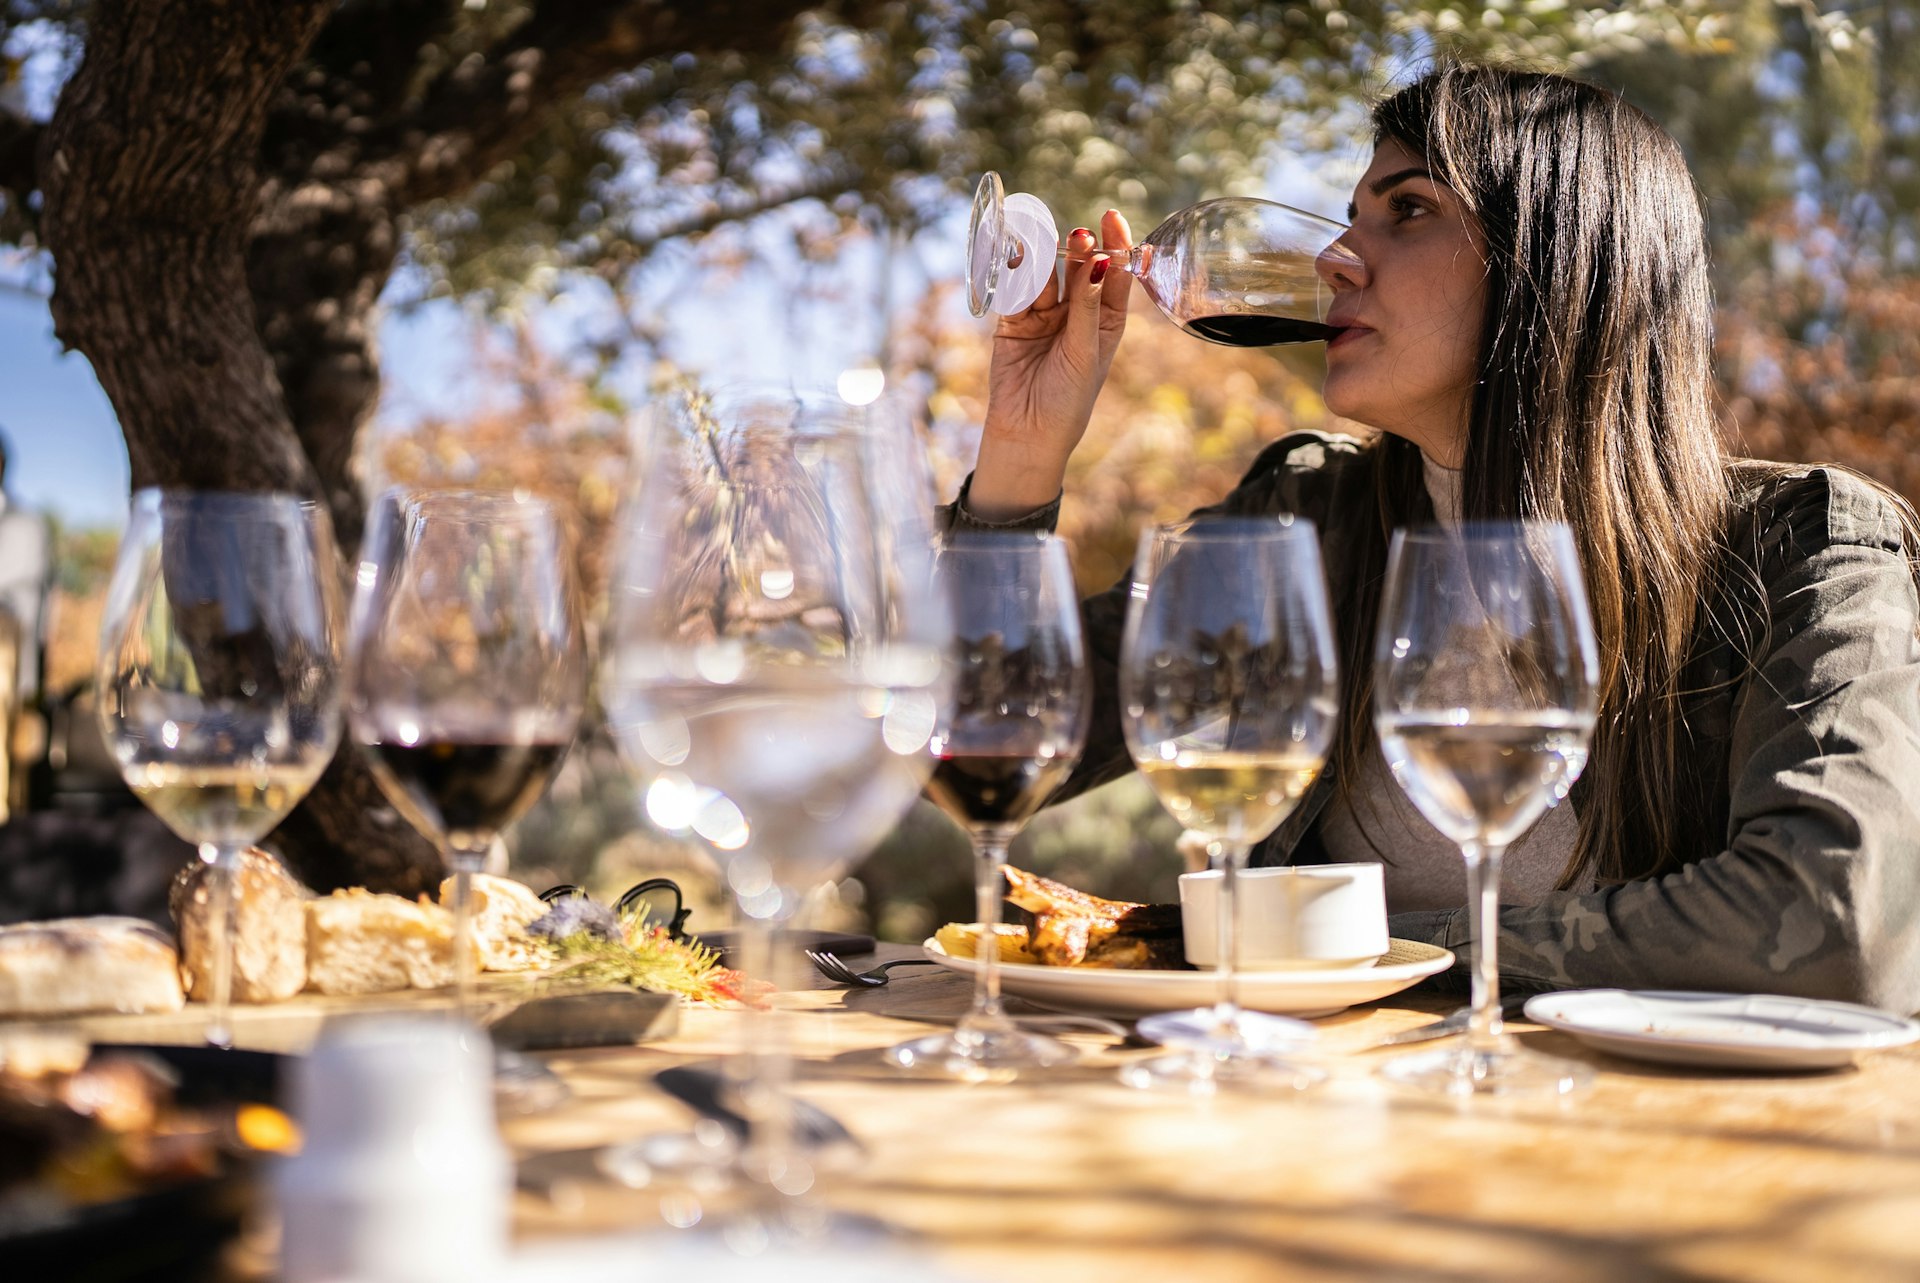 A women at a wine-tasting event is sipping red wine from the selection of white and red wines laid out on a table in front of her